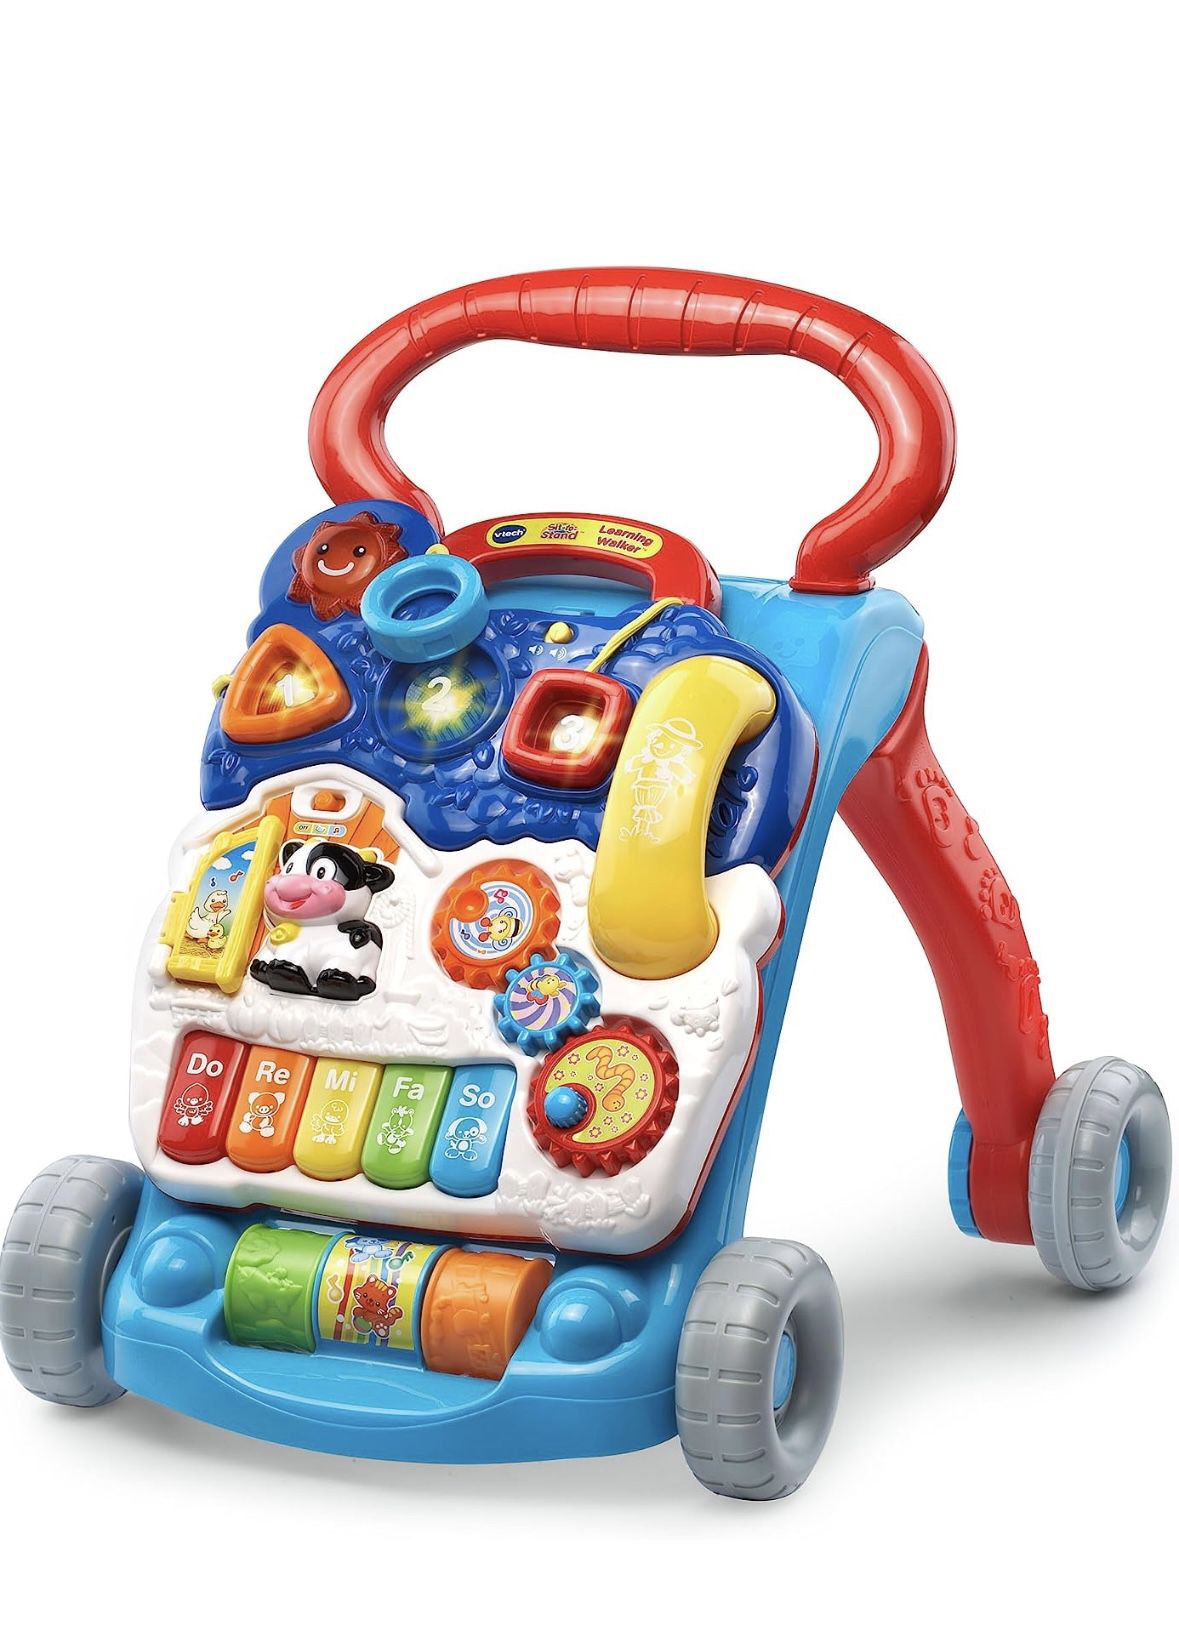 Brand New VTech Sit-to-Stand Learning Walker